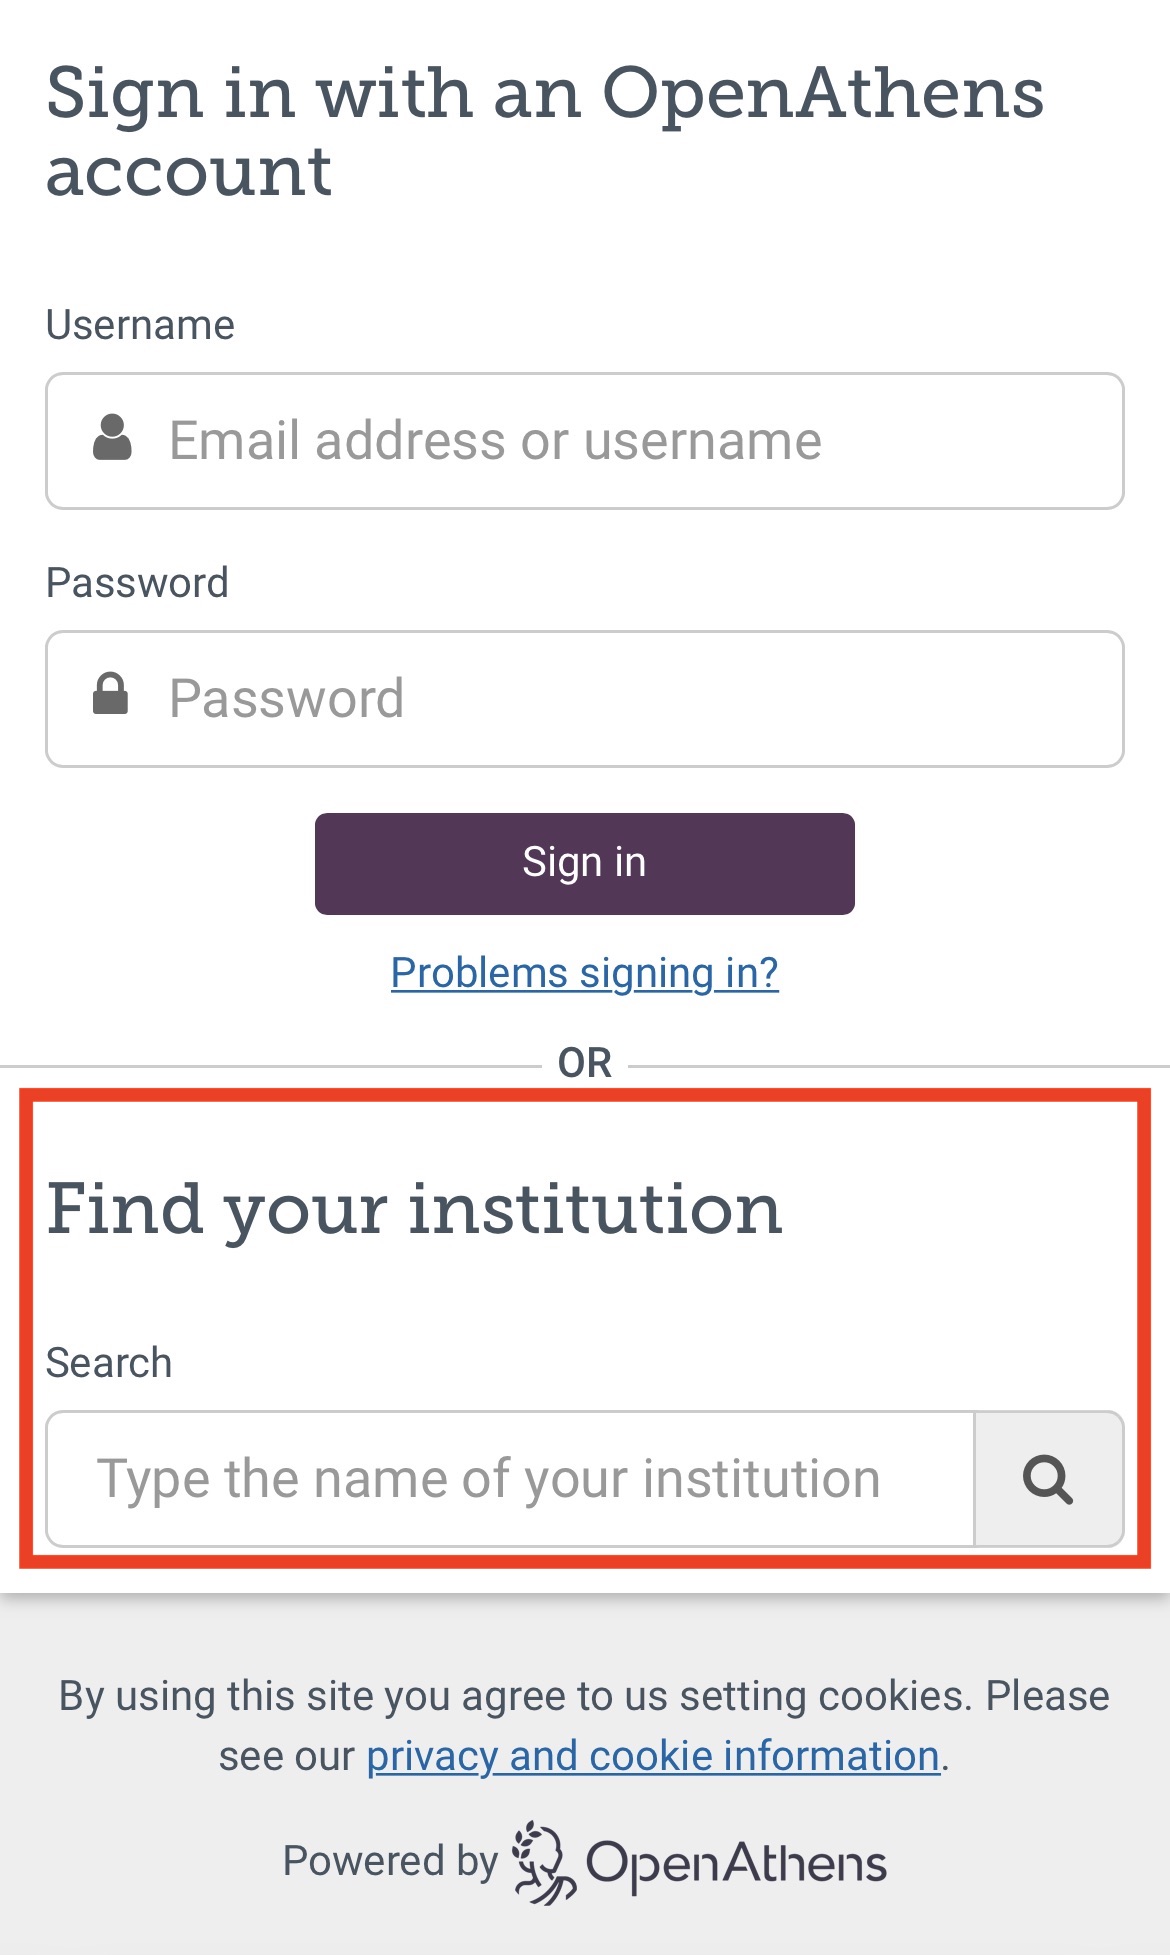 Screenshot of an example of a "Sign in with an OpenAthens account" window and where to enter name of our institution Department of Health Tasmania.